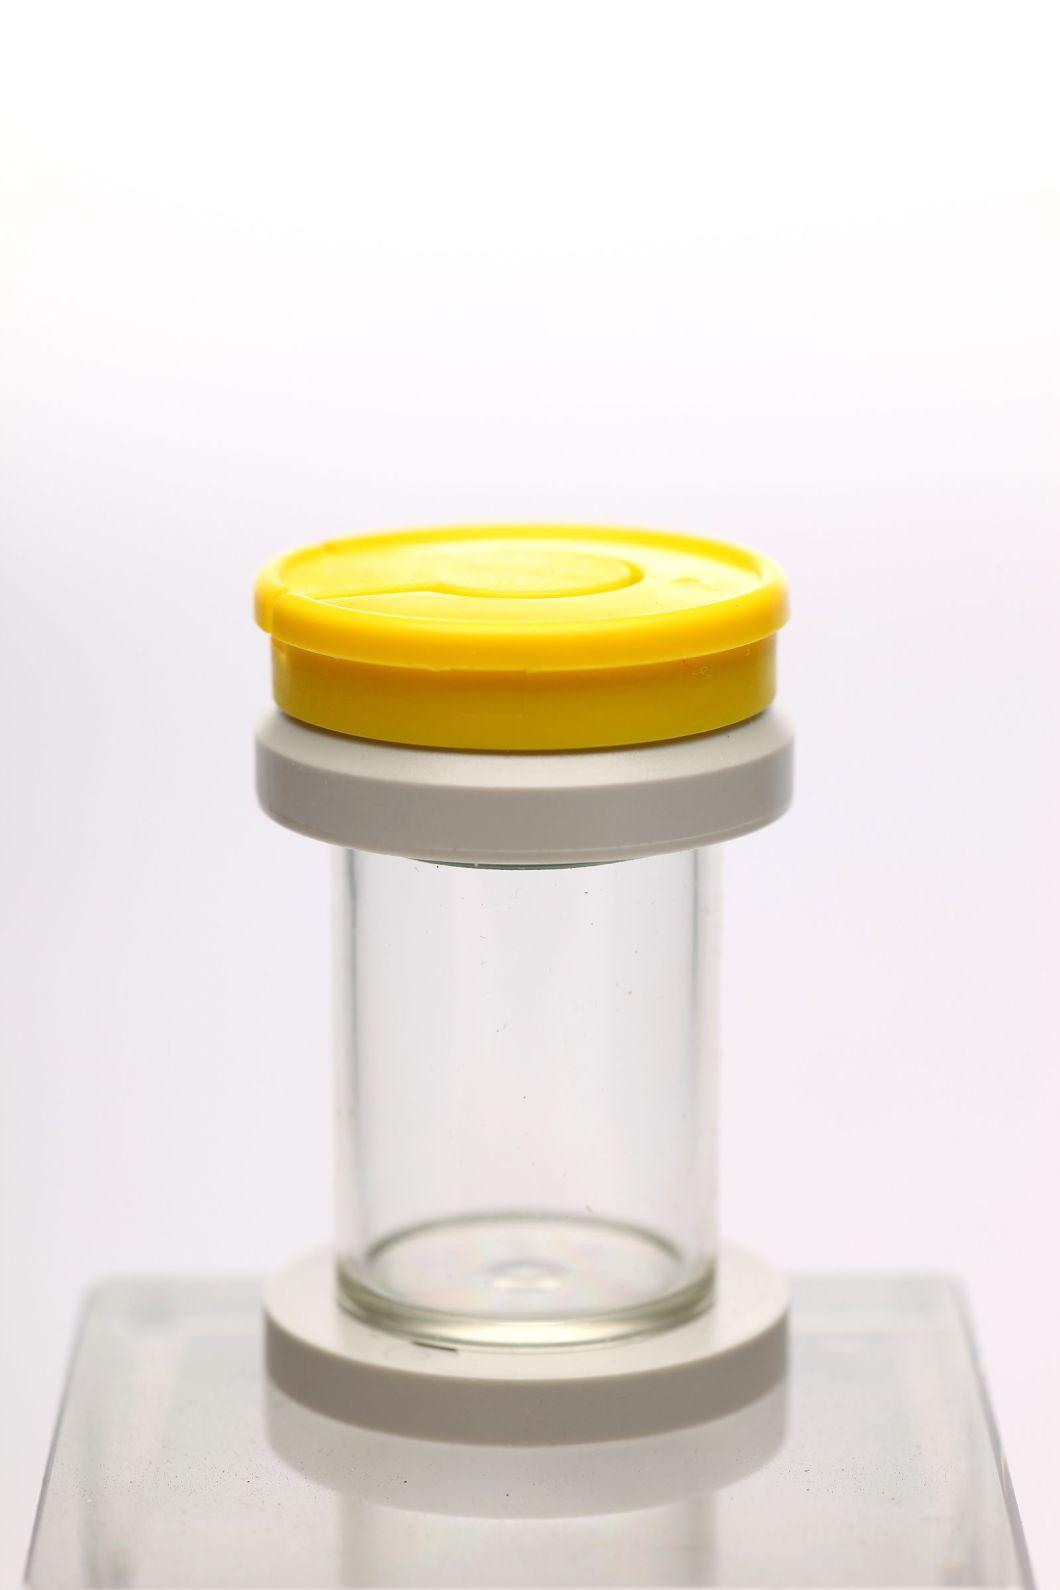 Sterile and Disposable Specimen Container with Yellow Cap